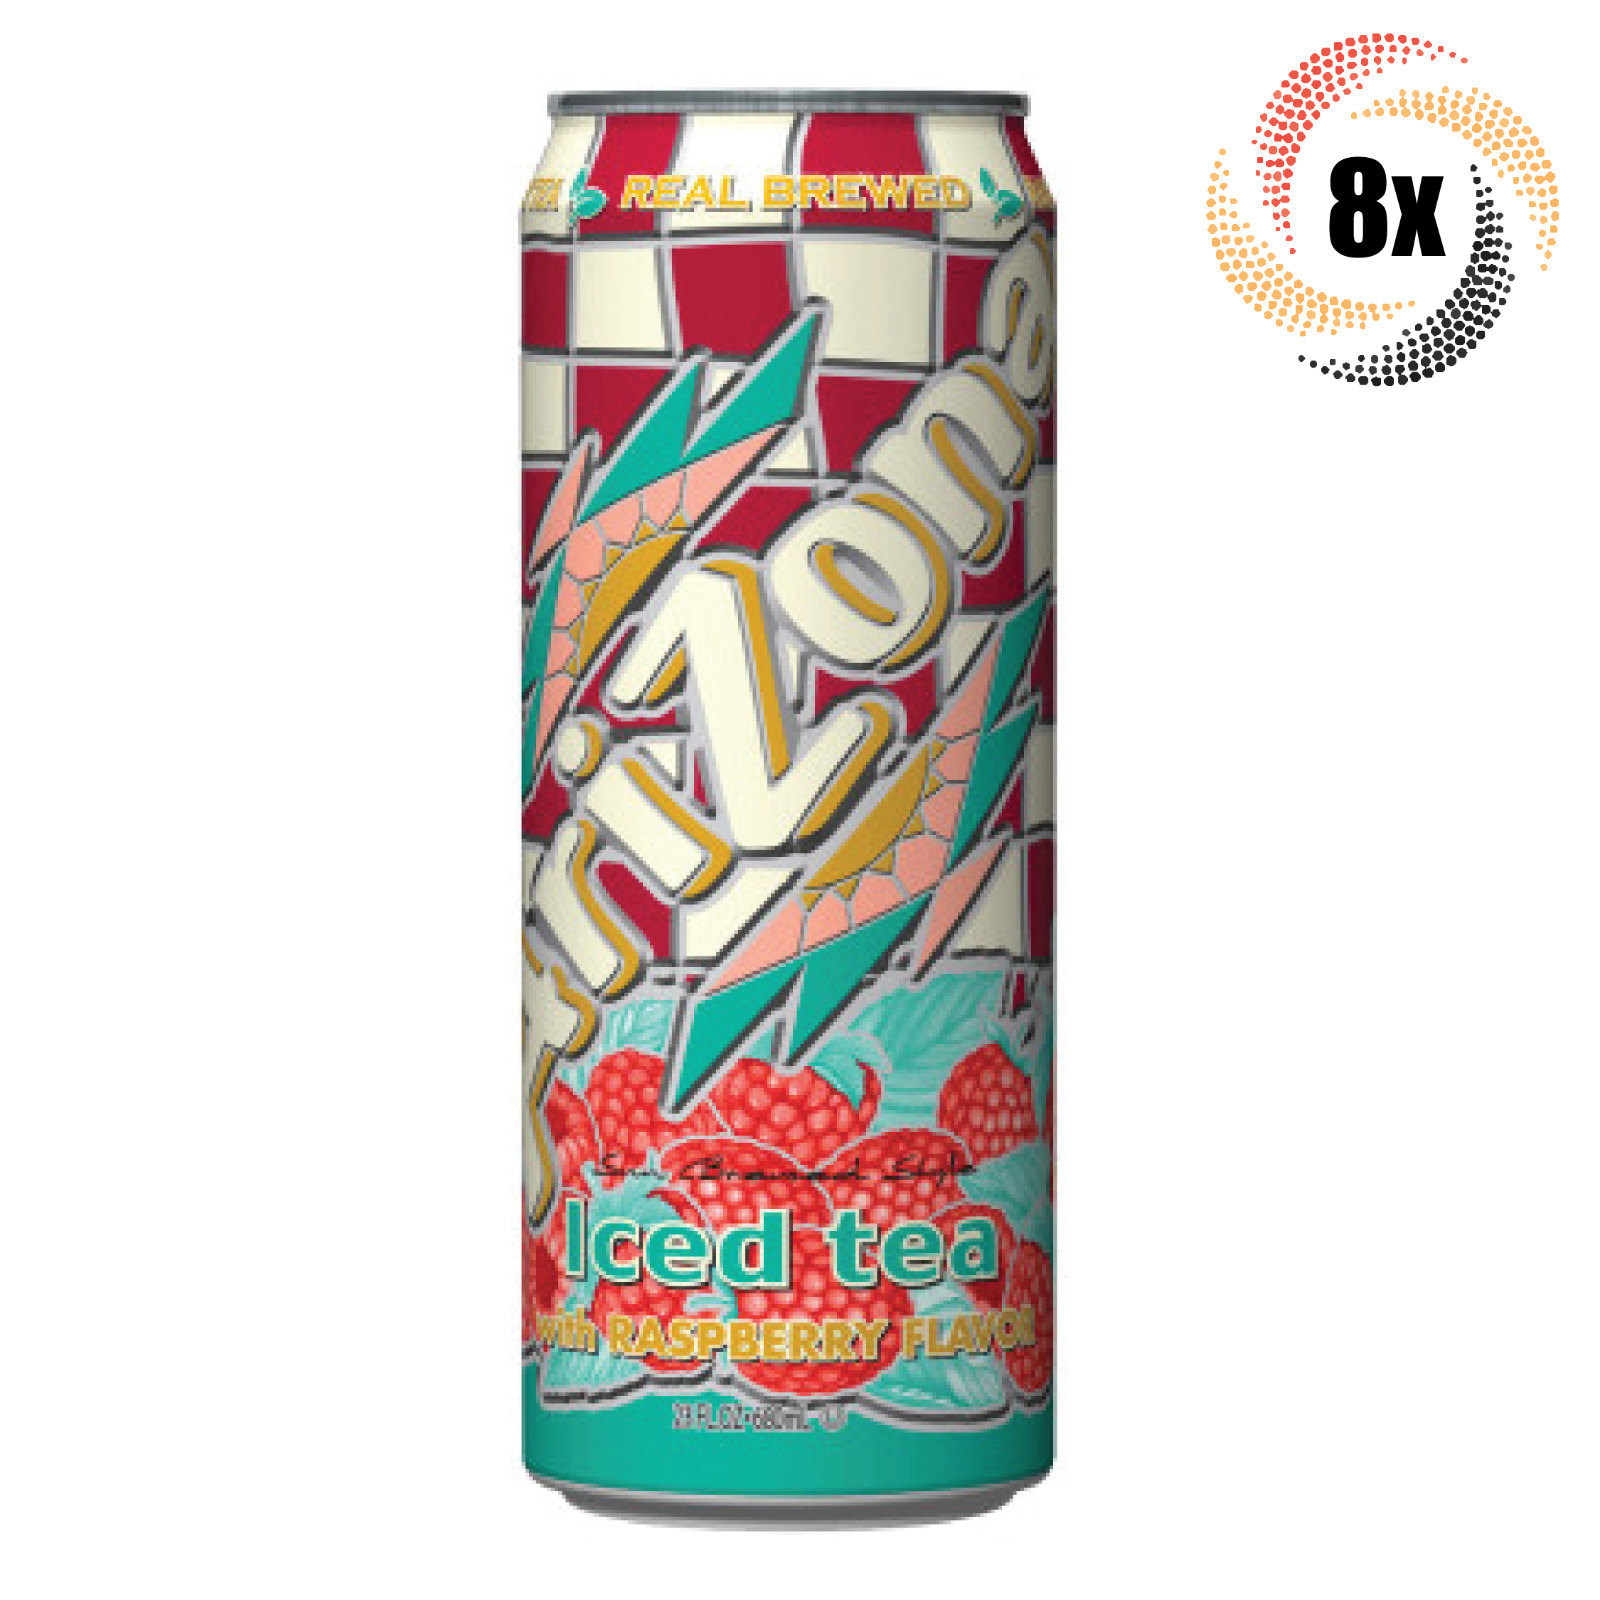 8x Cans Arizona Iced Tea With Raspberry Natural Flavor Juice 23oz Fast Shipping!